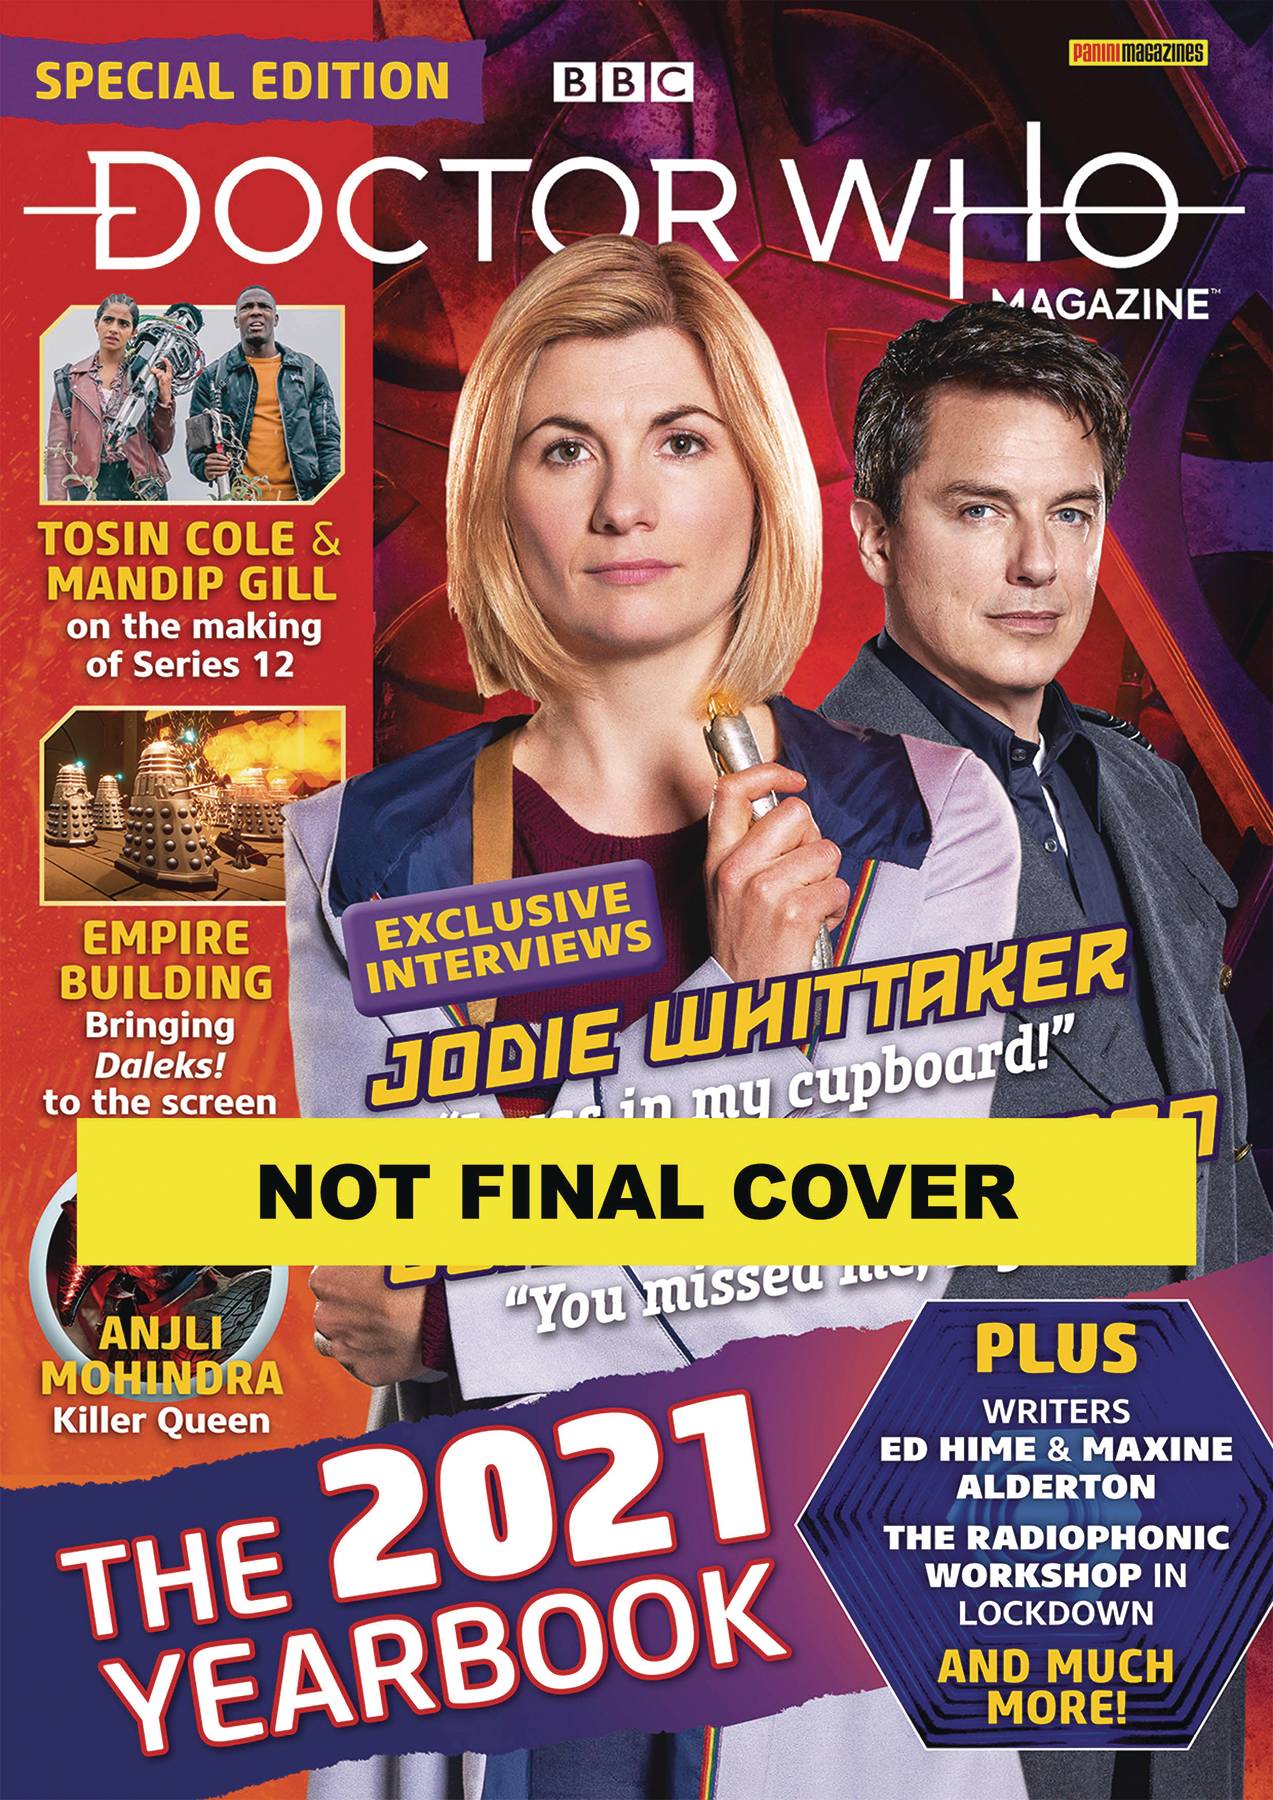 DOCTOR WHO MAGAZINE SPECIAL #59